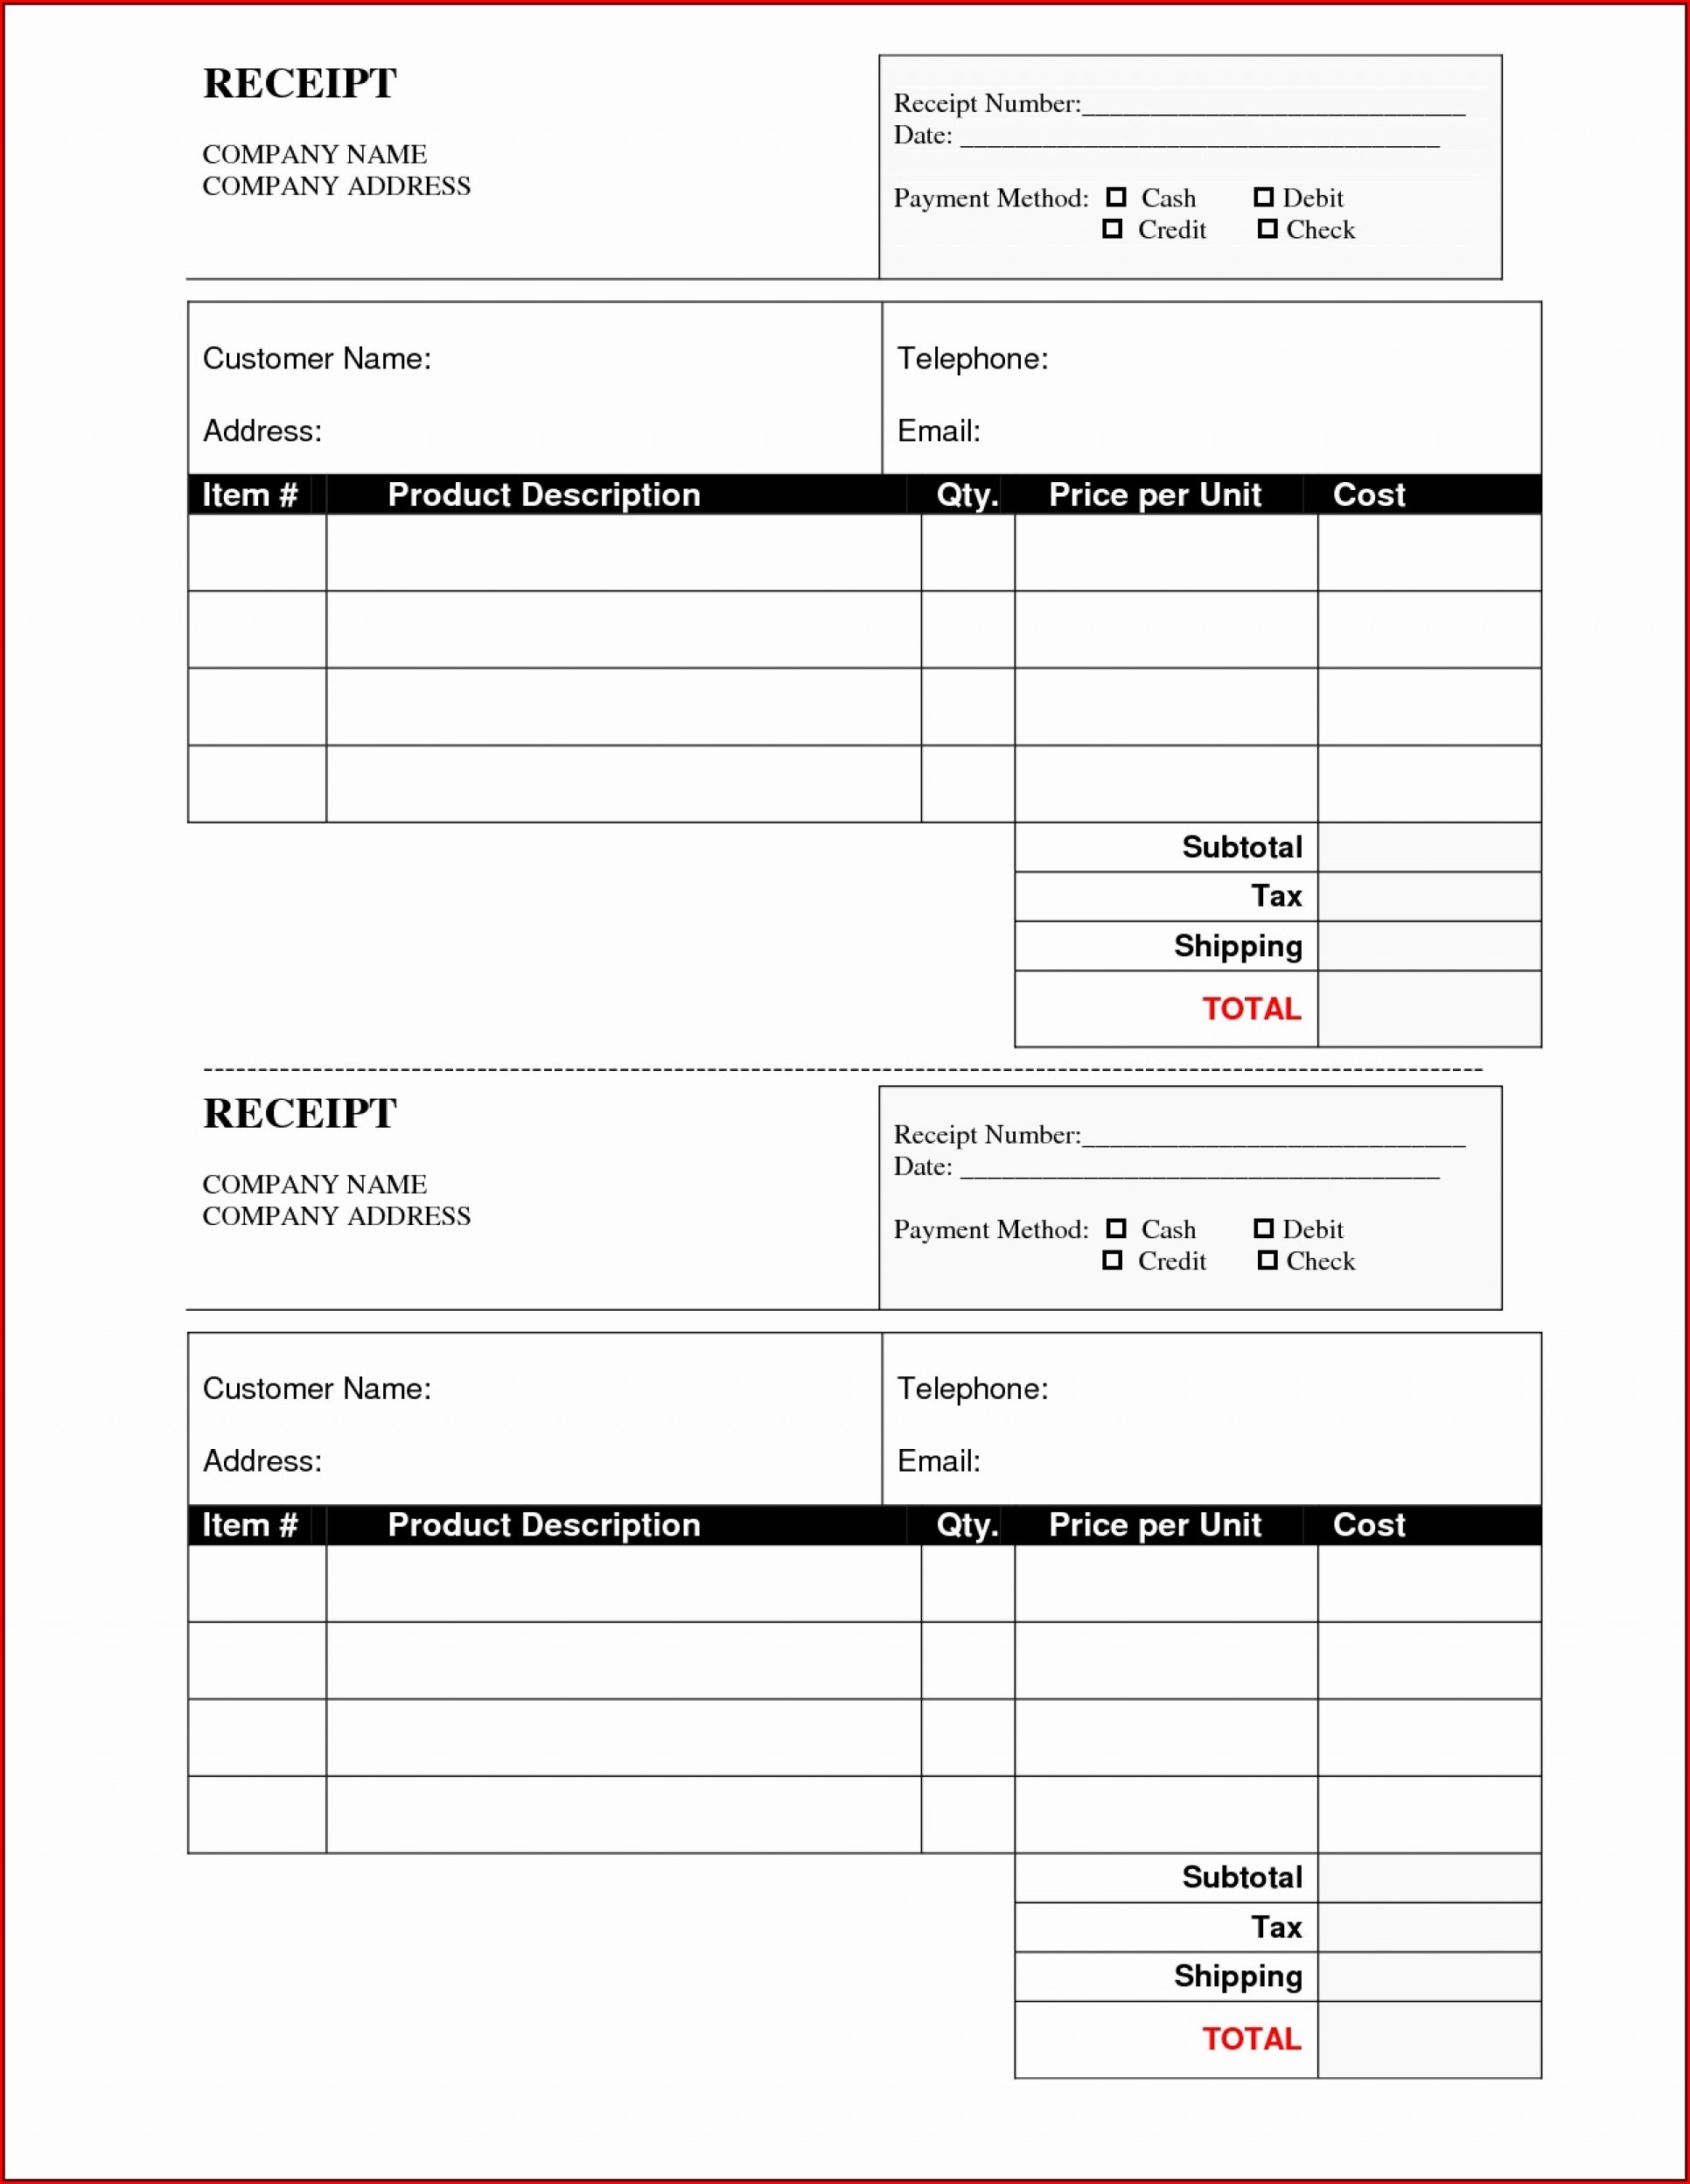 blank-receipt-template-pdf-template-1-resume-examples-a19xadqy4k